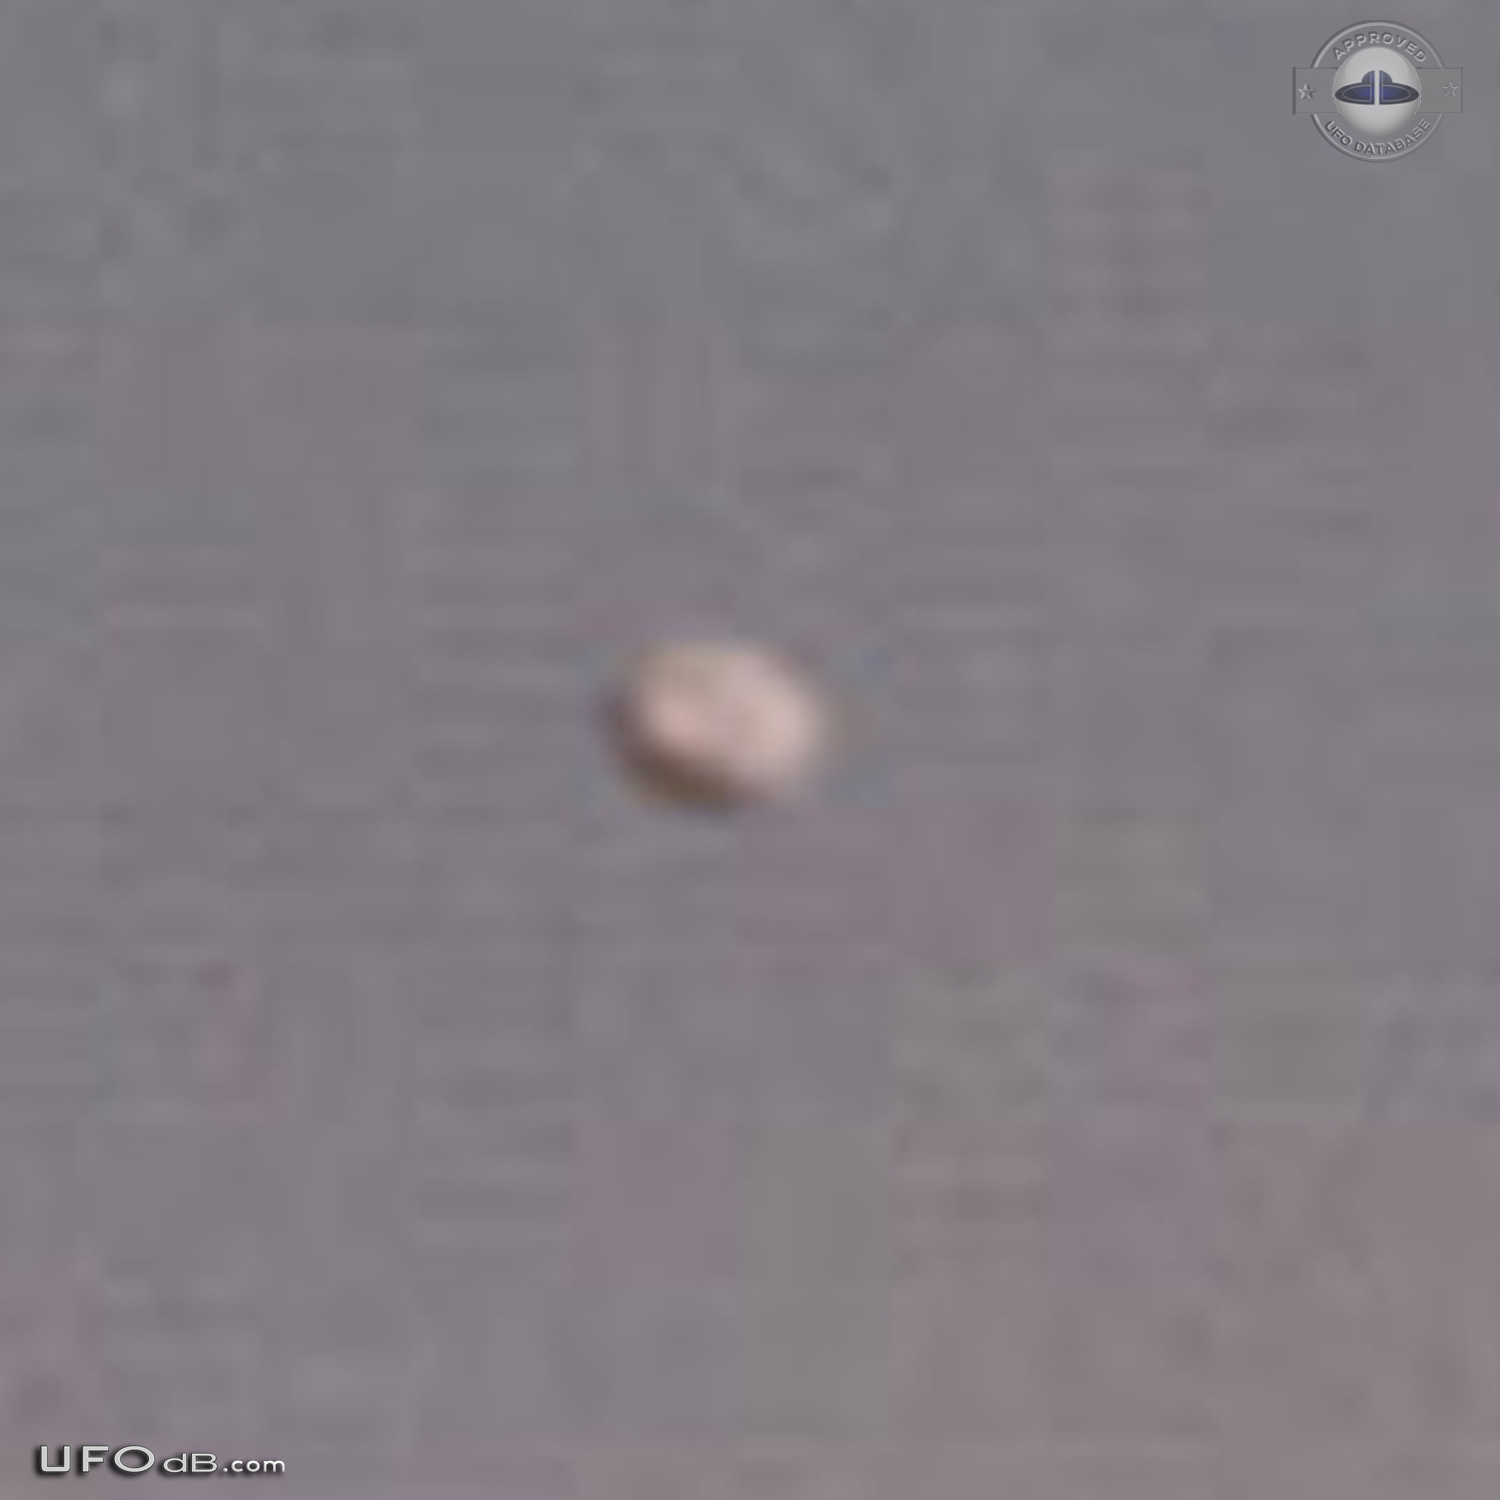 Famous Florida Uruguay UFO pictures sequence taken July 1977 UFO Picture #463-6